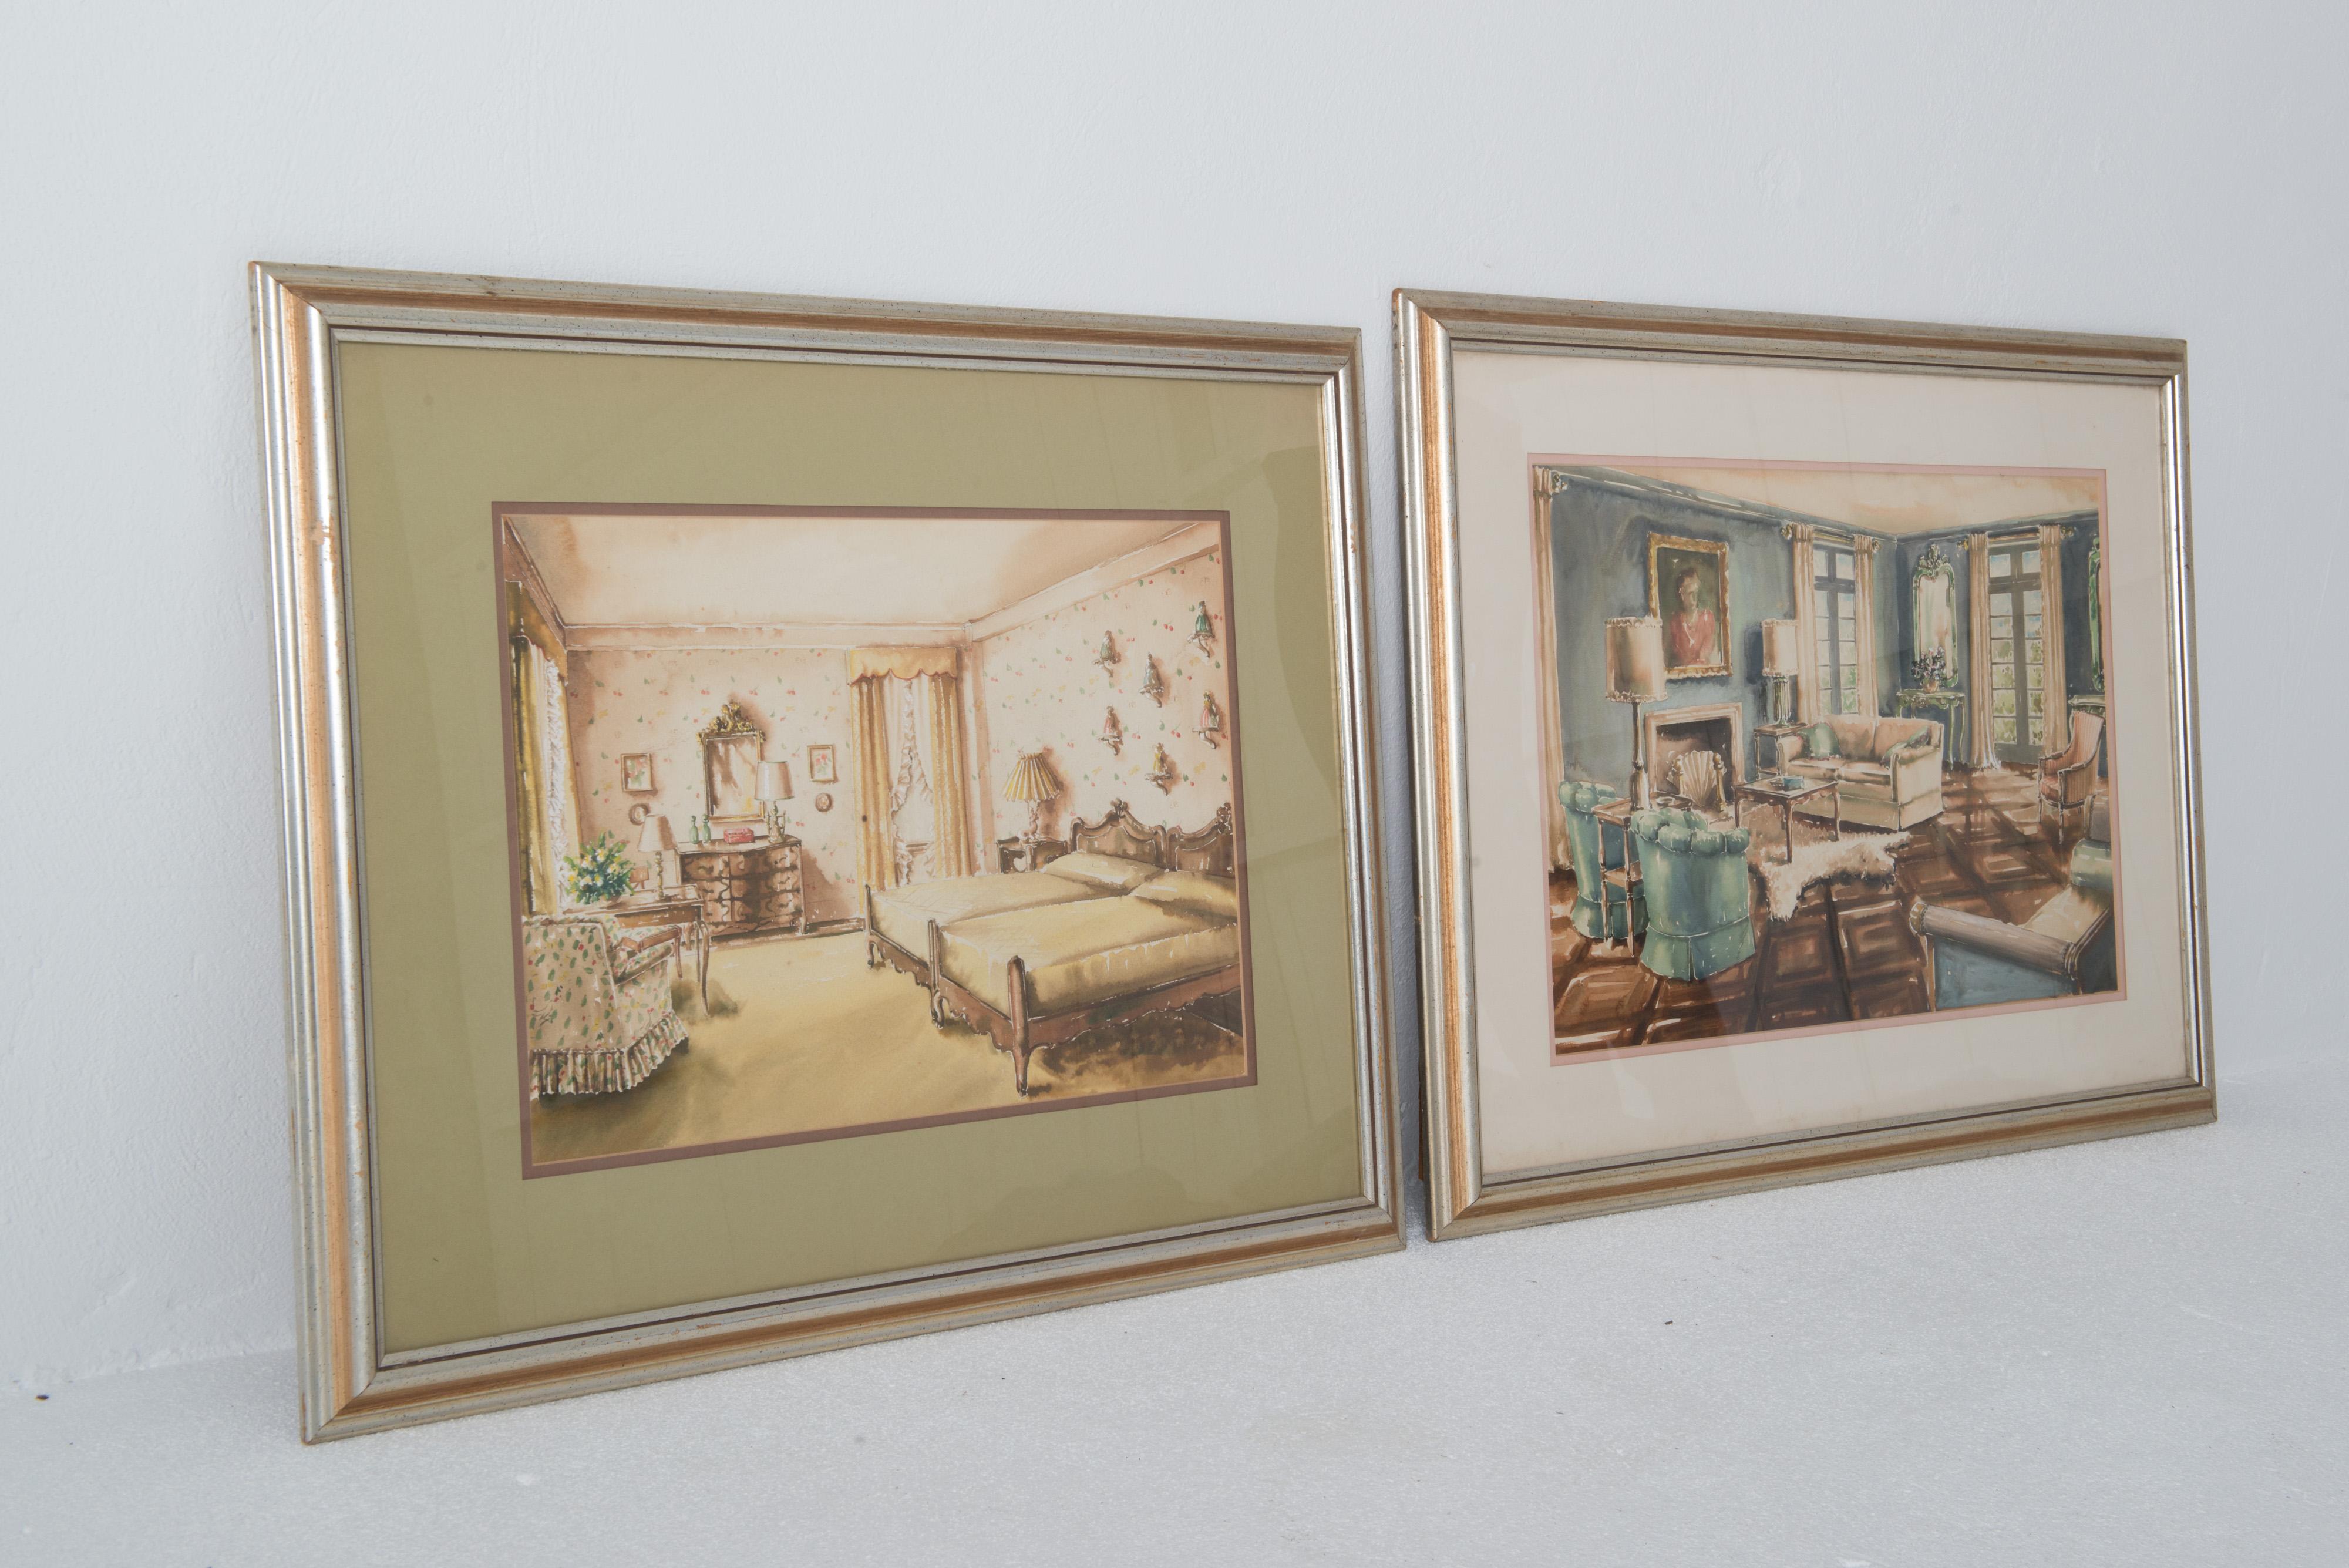 These are two stunning watercolor renderings of quintessential 1940s interiors.
One is a beautiful teal and cream living room. The other is a charming patterned beige bedroom. Both paintings are matted and framed in gilt wood frames.
The green